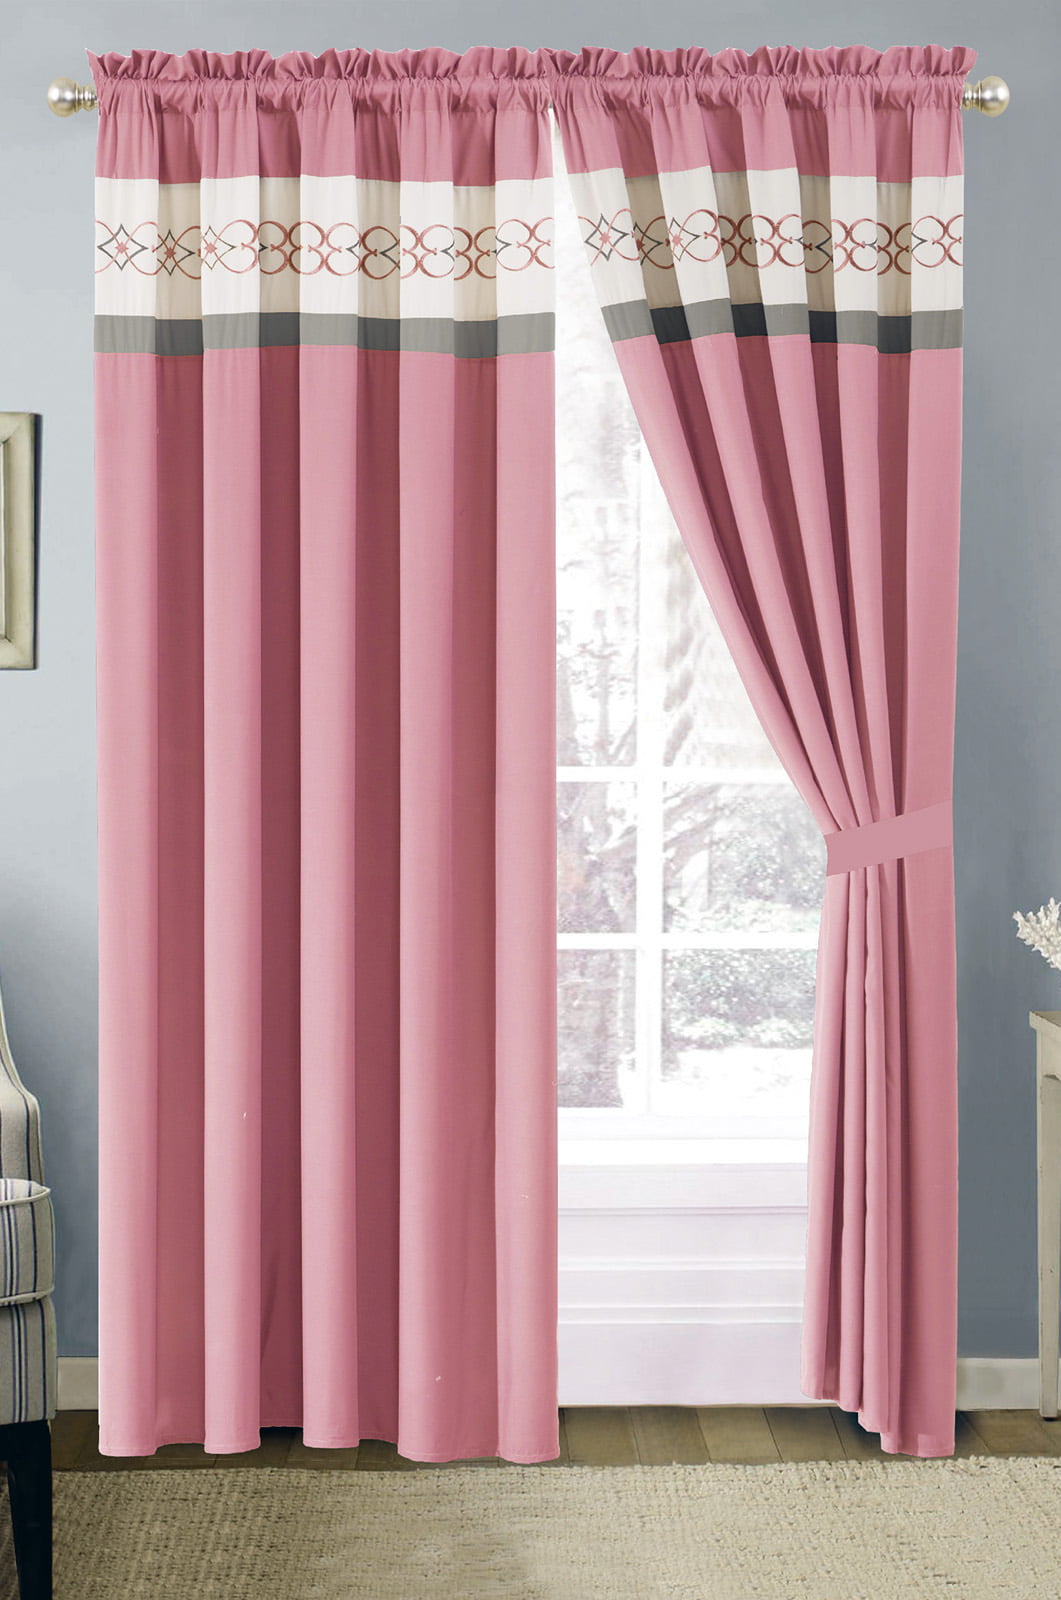 4-Pc Heart Diamond Spade Clover Floral Embroidery Curtain Set Pink Gray White 